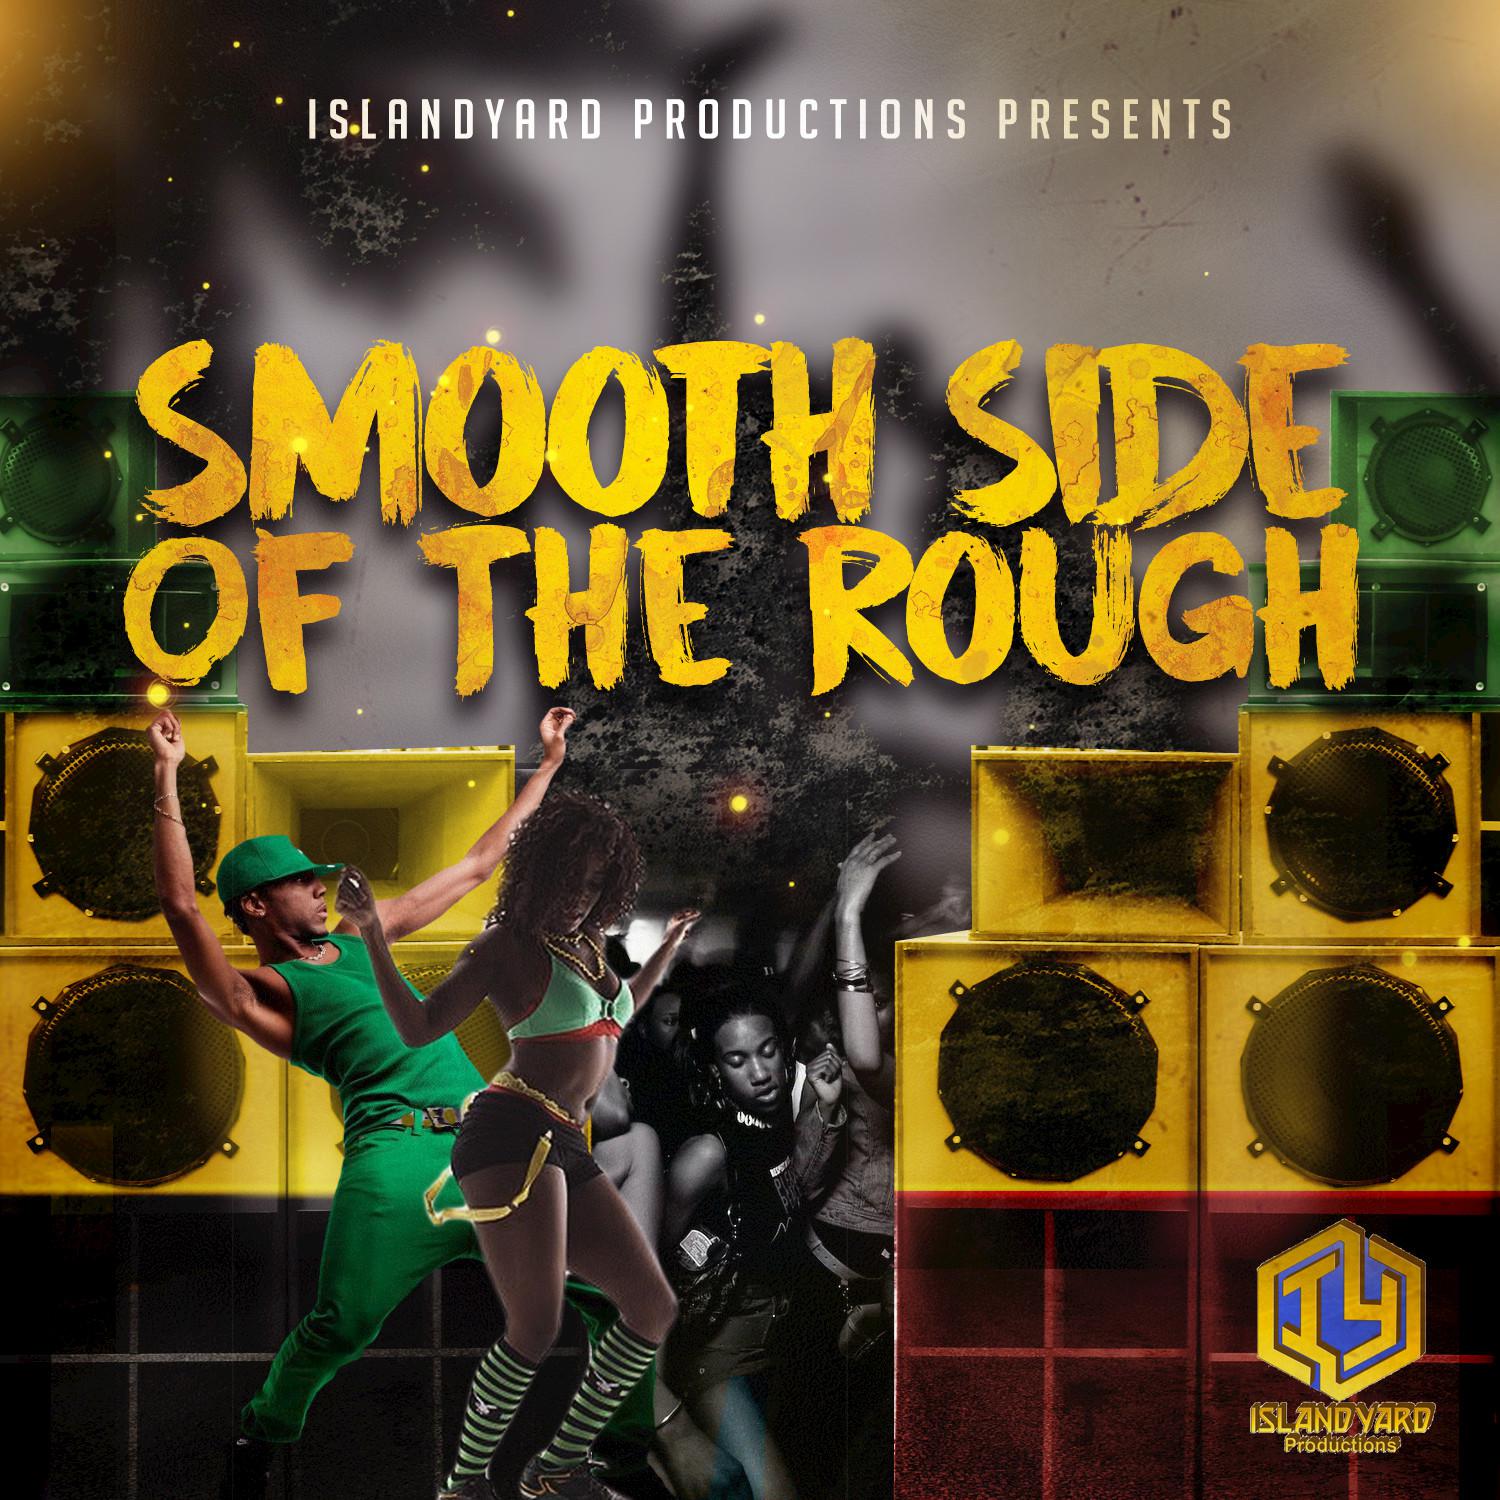 Smoother Side of the Rough